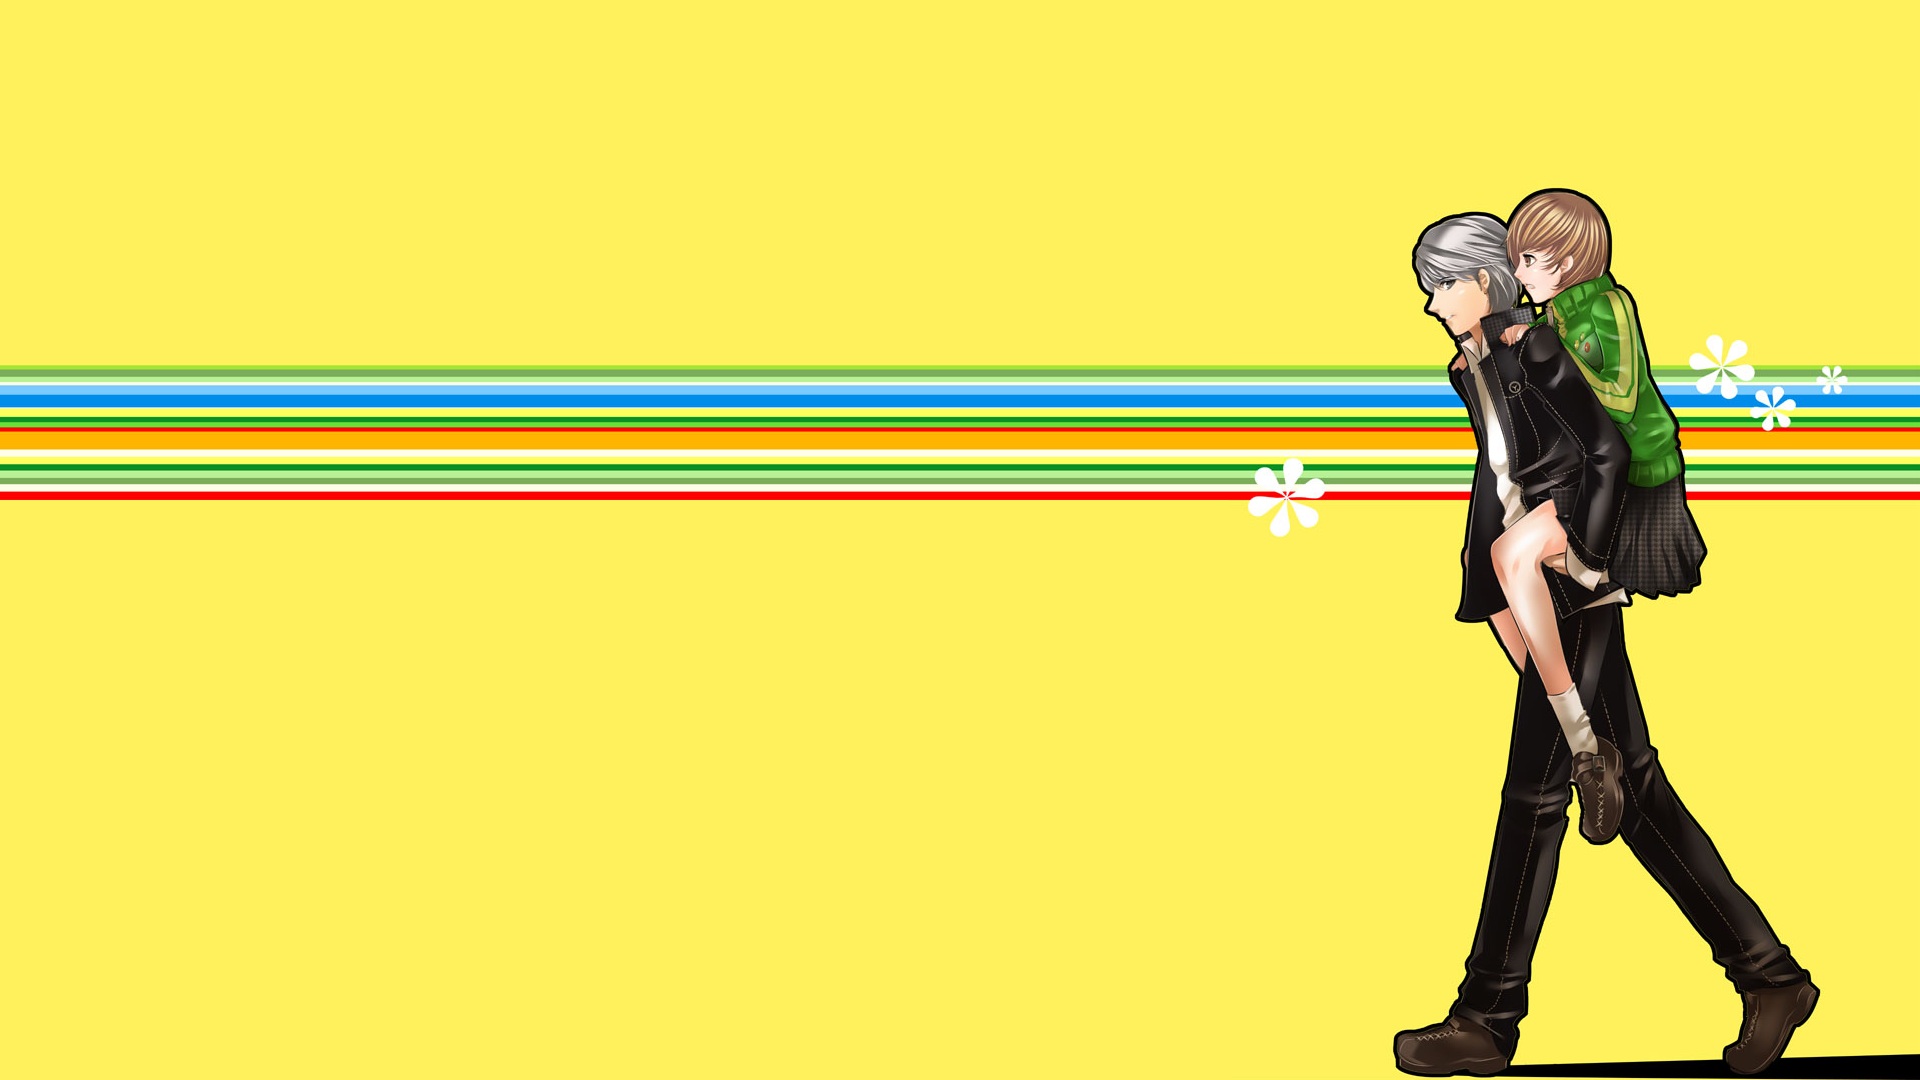 Download wallpaper for 240x320 resolution | Anime Yellow Persona 4 Chie ...